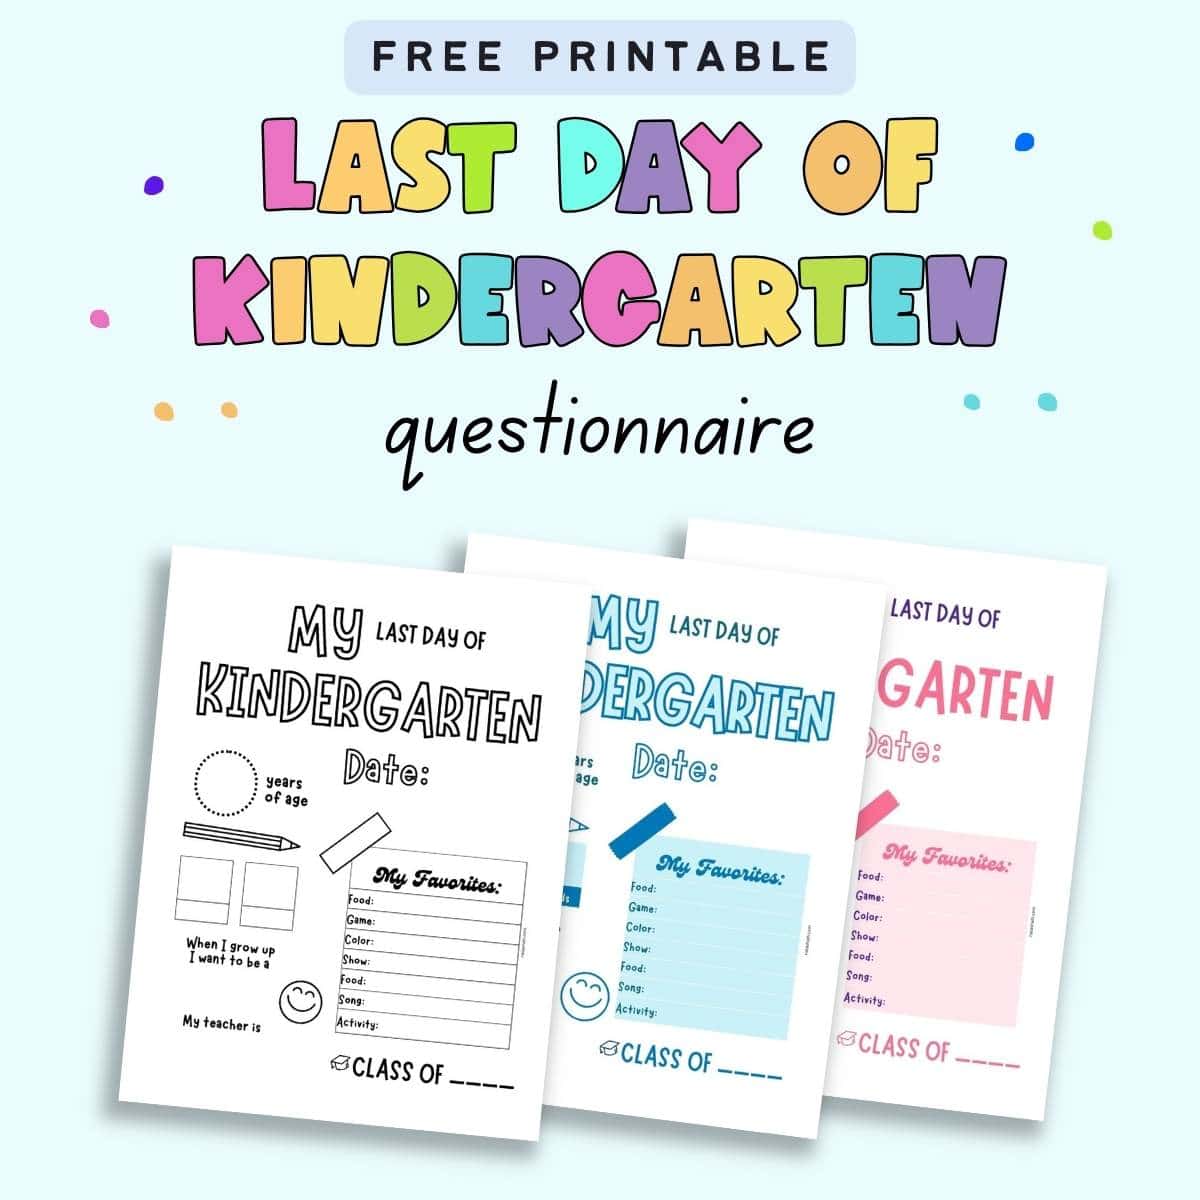 Text "free printable last day of kindergarten questionnaire" with a preview of three pages of last day of kindergarten questionnaire. All pages are the same except for the color scheme. One is blue, one pink, and one black and white.